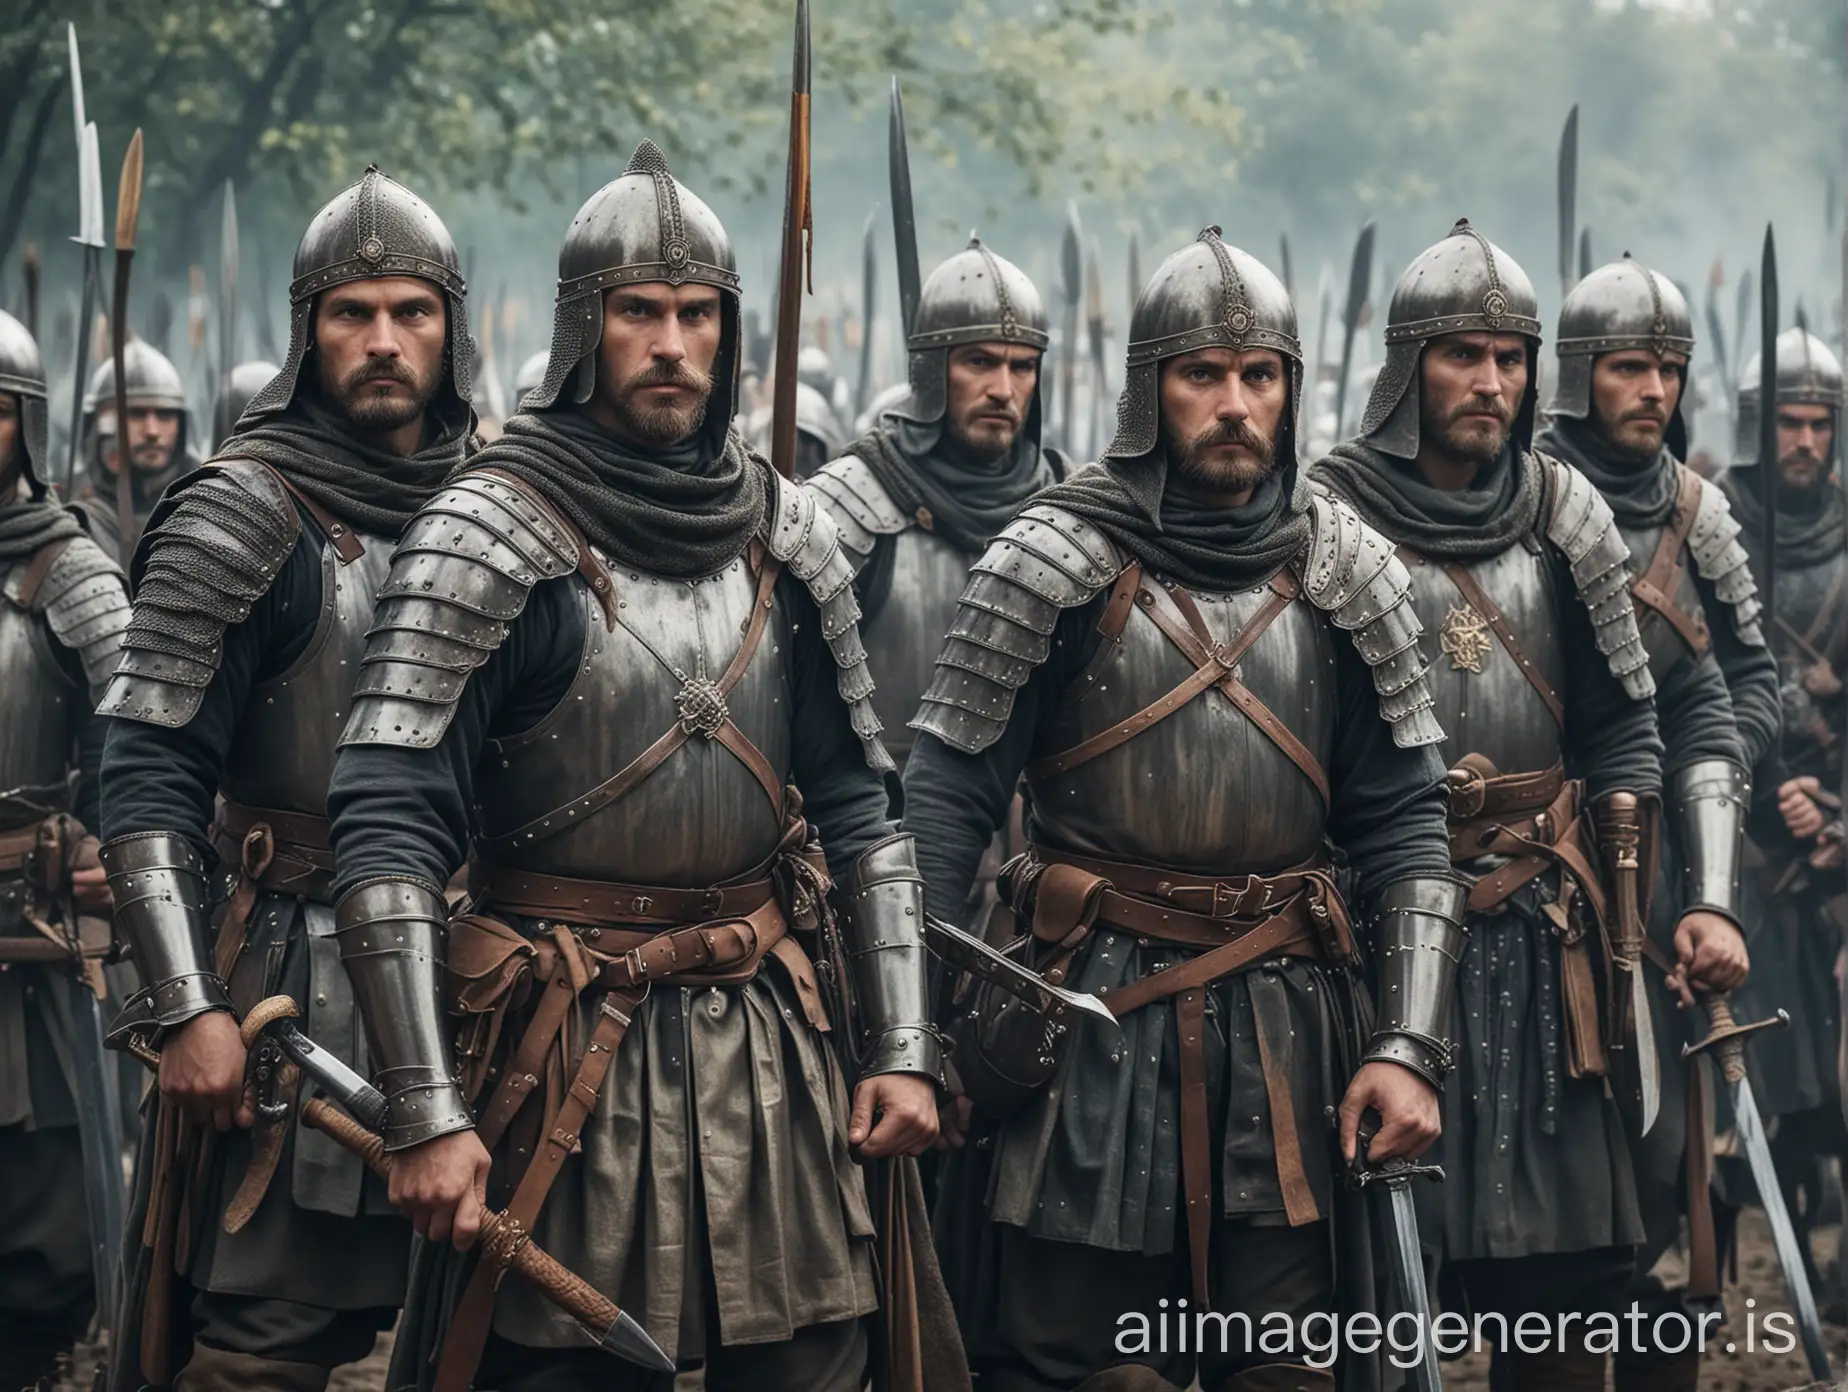 Medieval-Soldiers-from-Eastern-Europe-in-Full-Gear-with-Swords-and-Spears